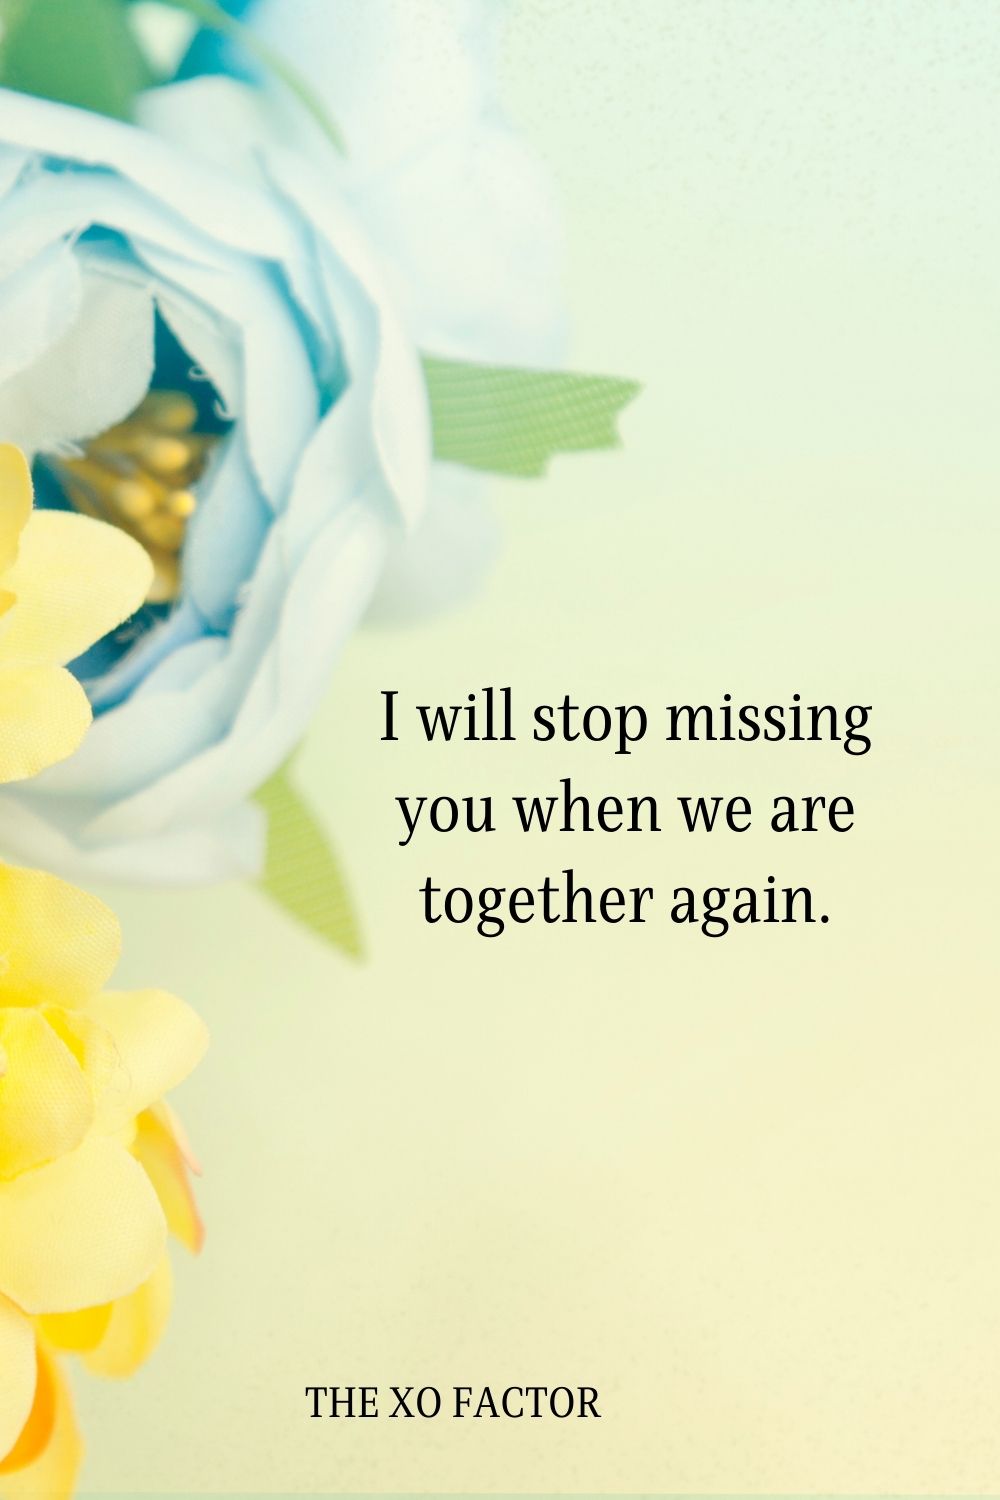 I will stop missing you when we are together again.